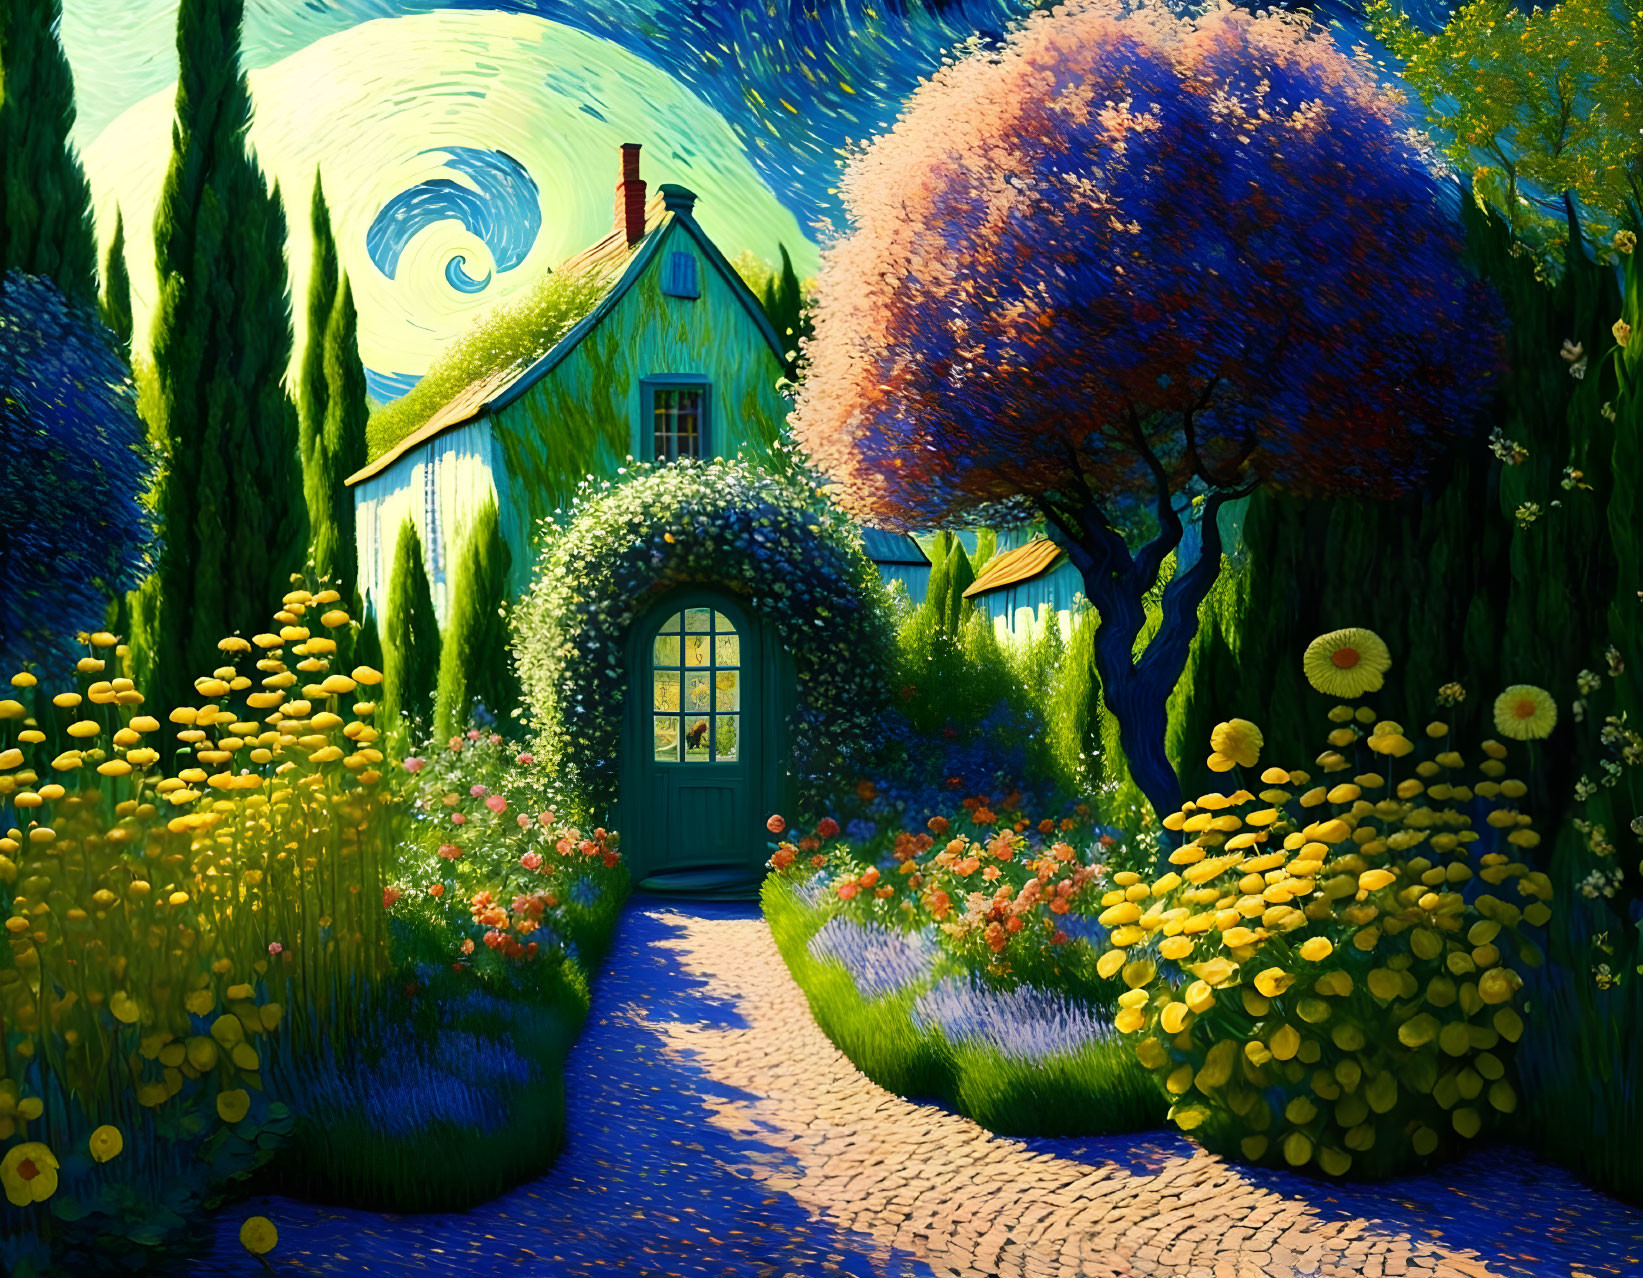 Colorful Van Gogh-style illustration of a cozy thatched-roof house in lush gardens with swirling